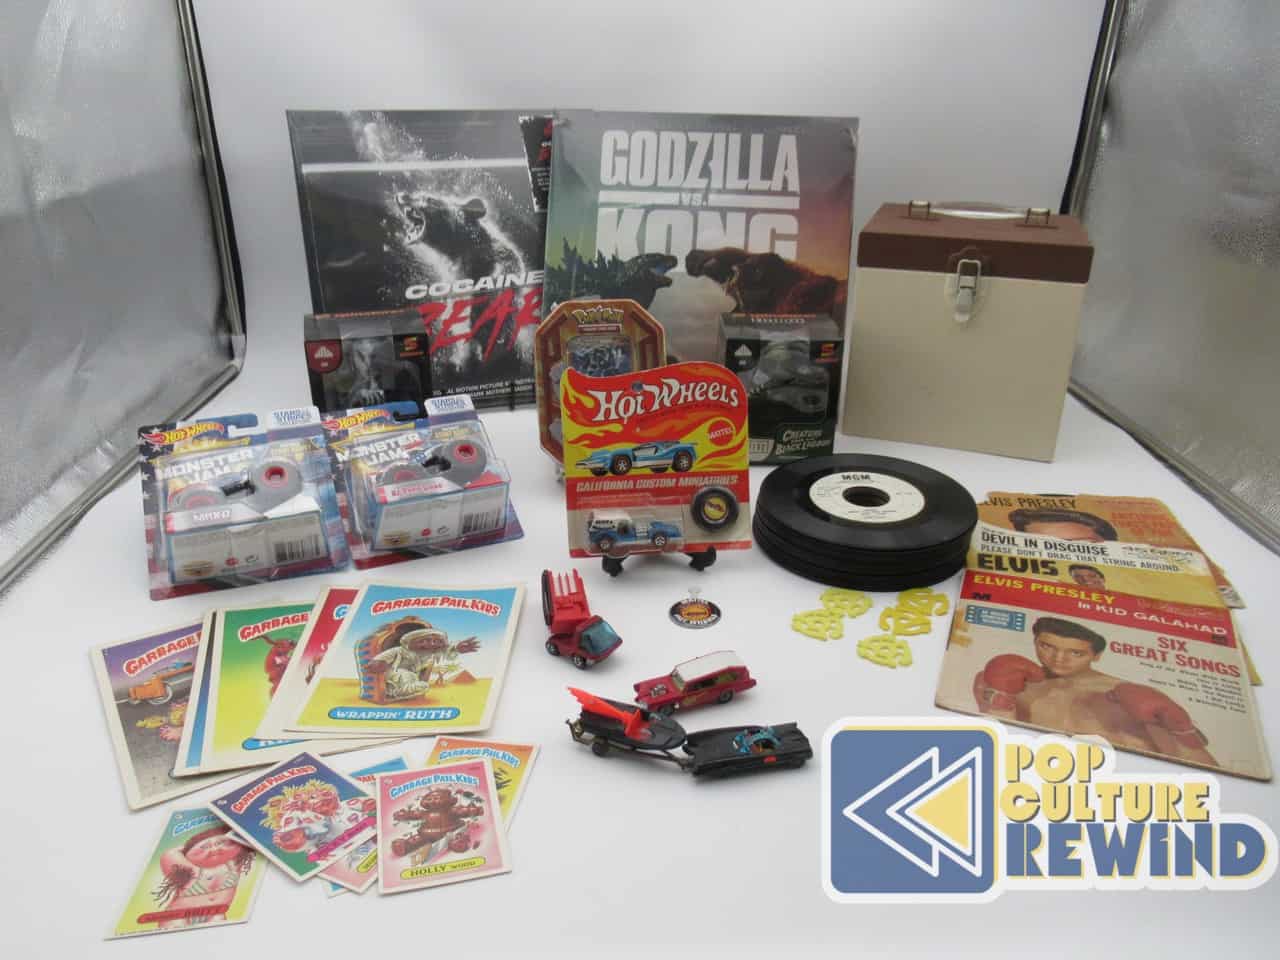 Diecast Cars, Records, & More at auction